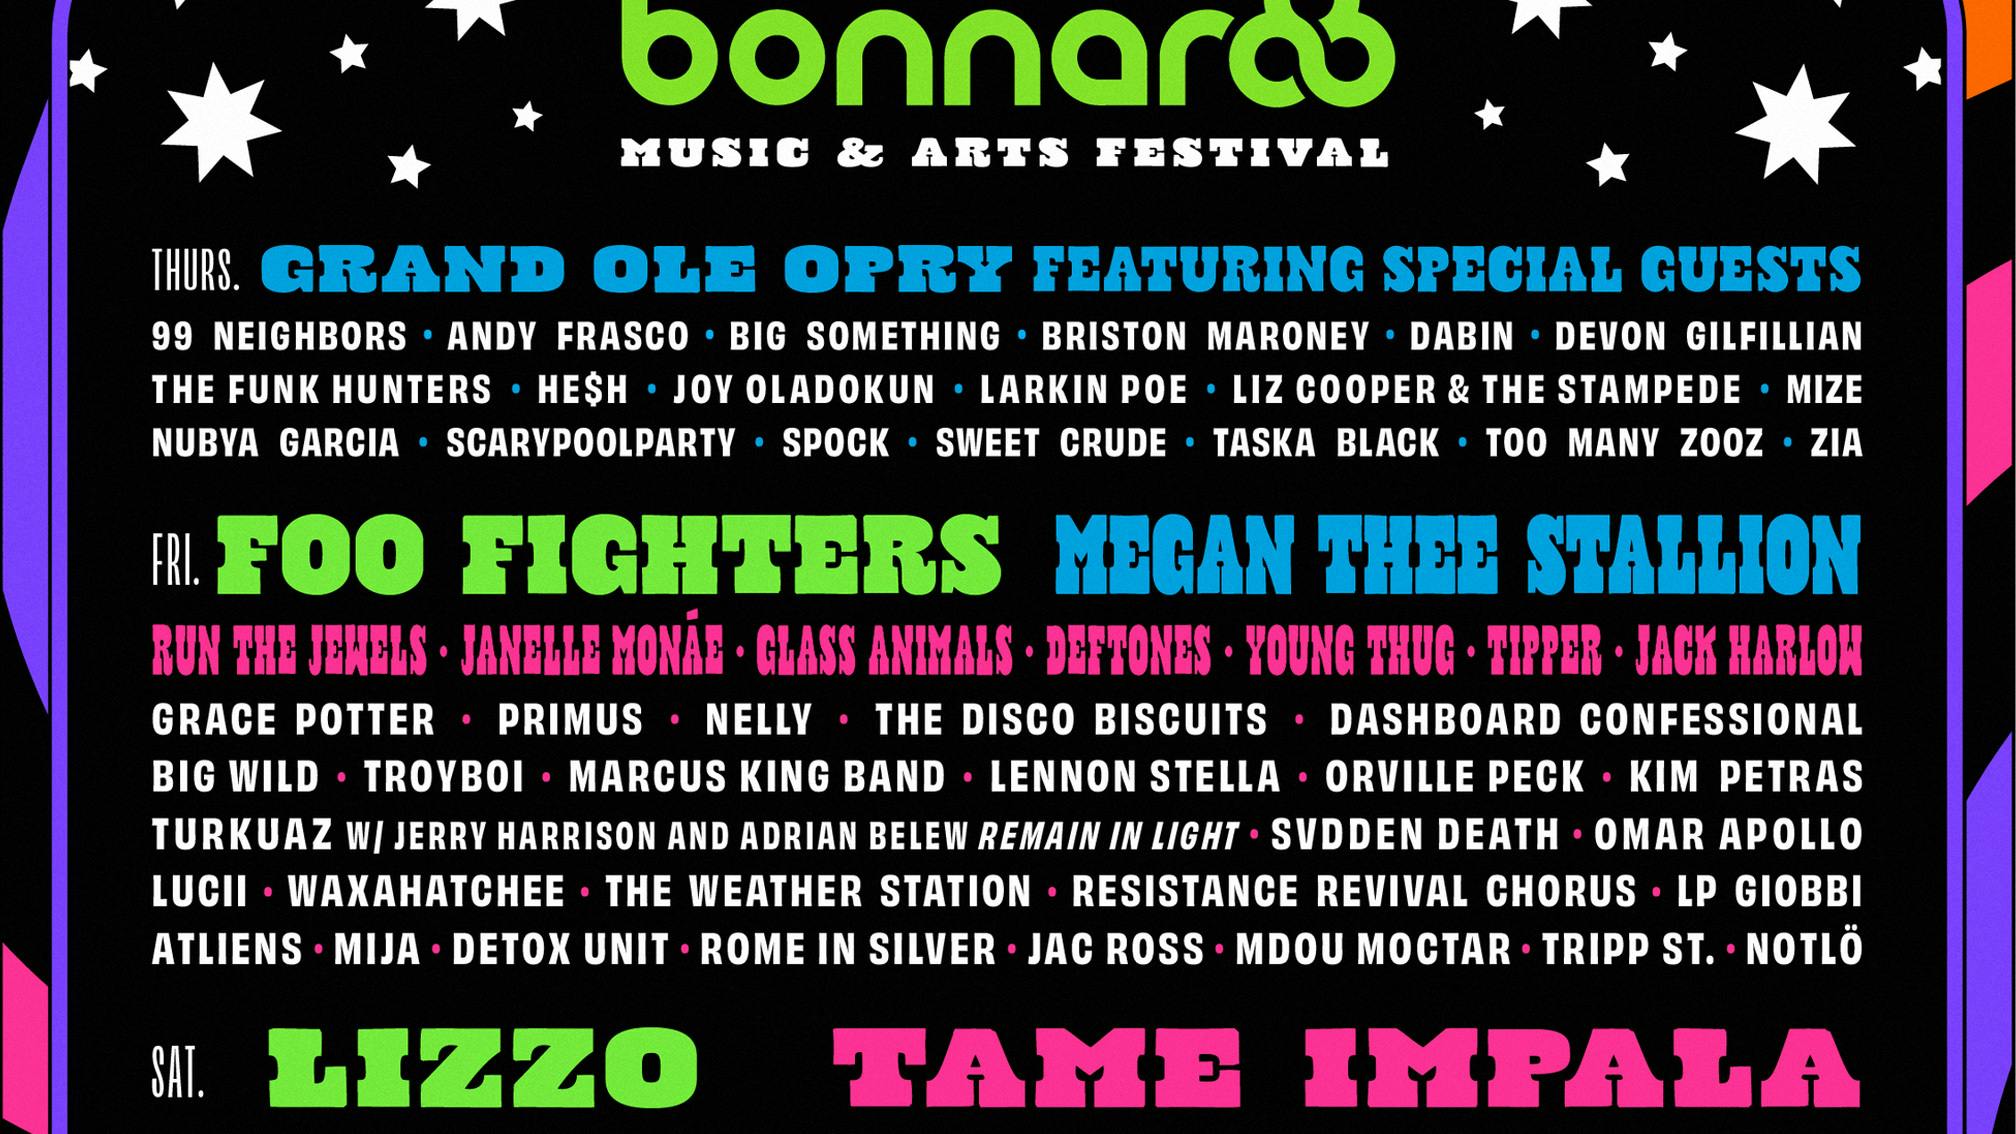 Foo Fighters, Deftones, Run The Jewels and more announced for Bonnaroo 2021